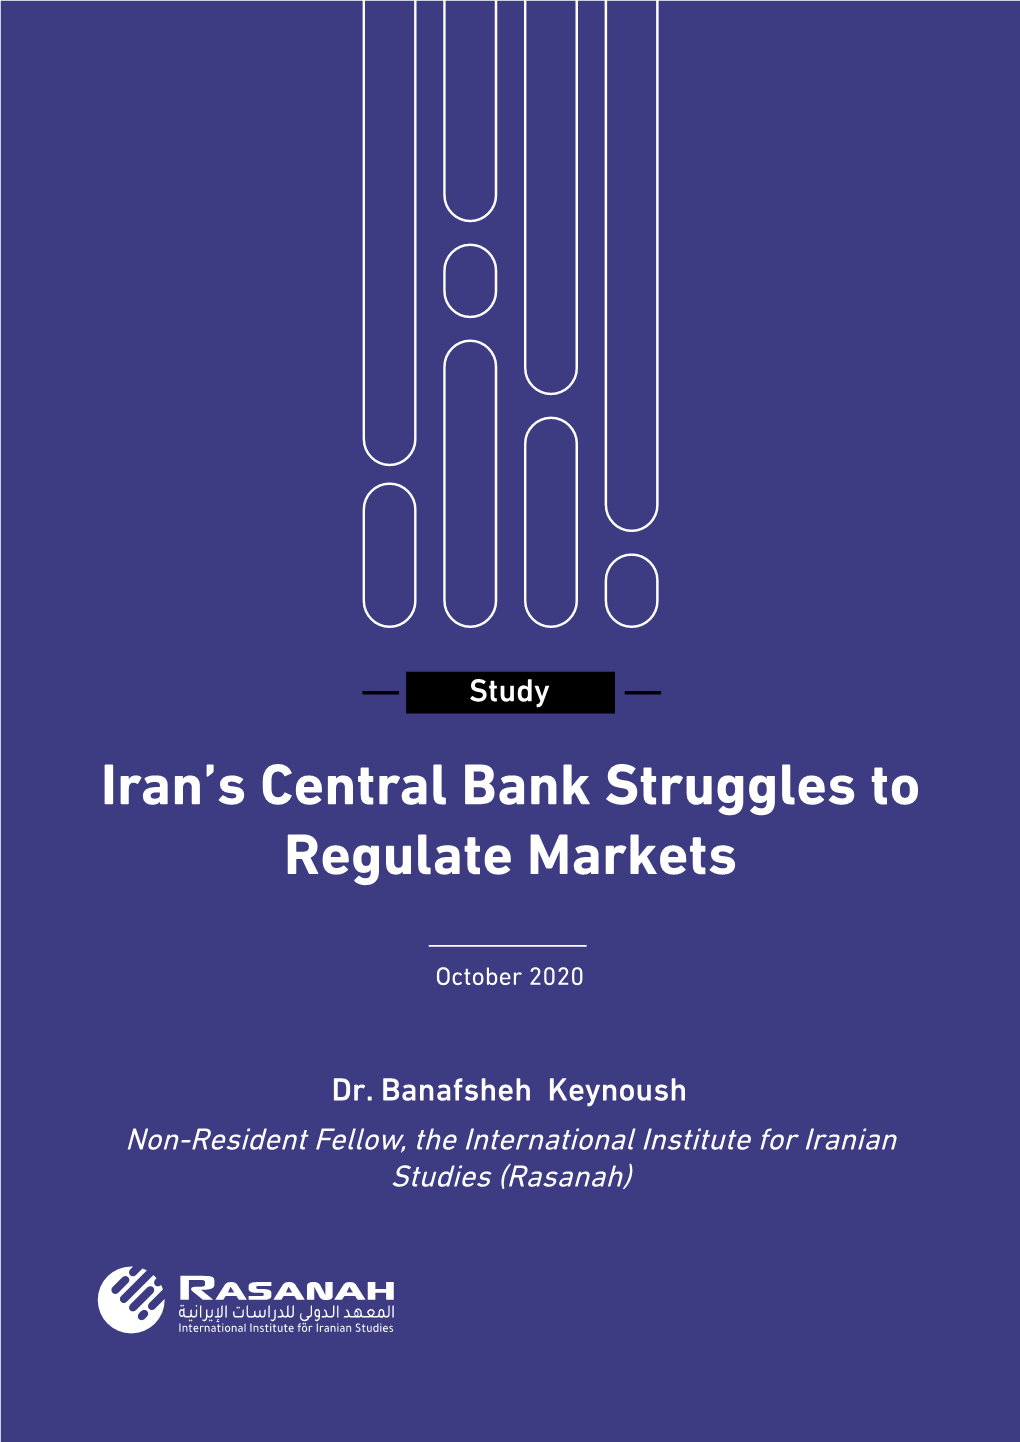 Iran's Central Bank Struggles to Regulate Markets